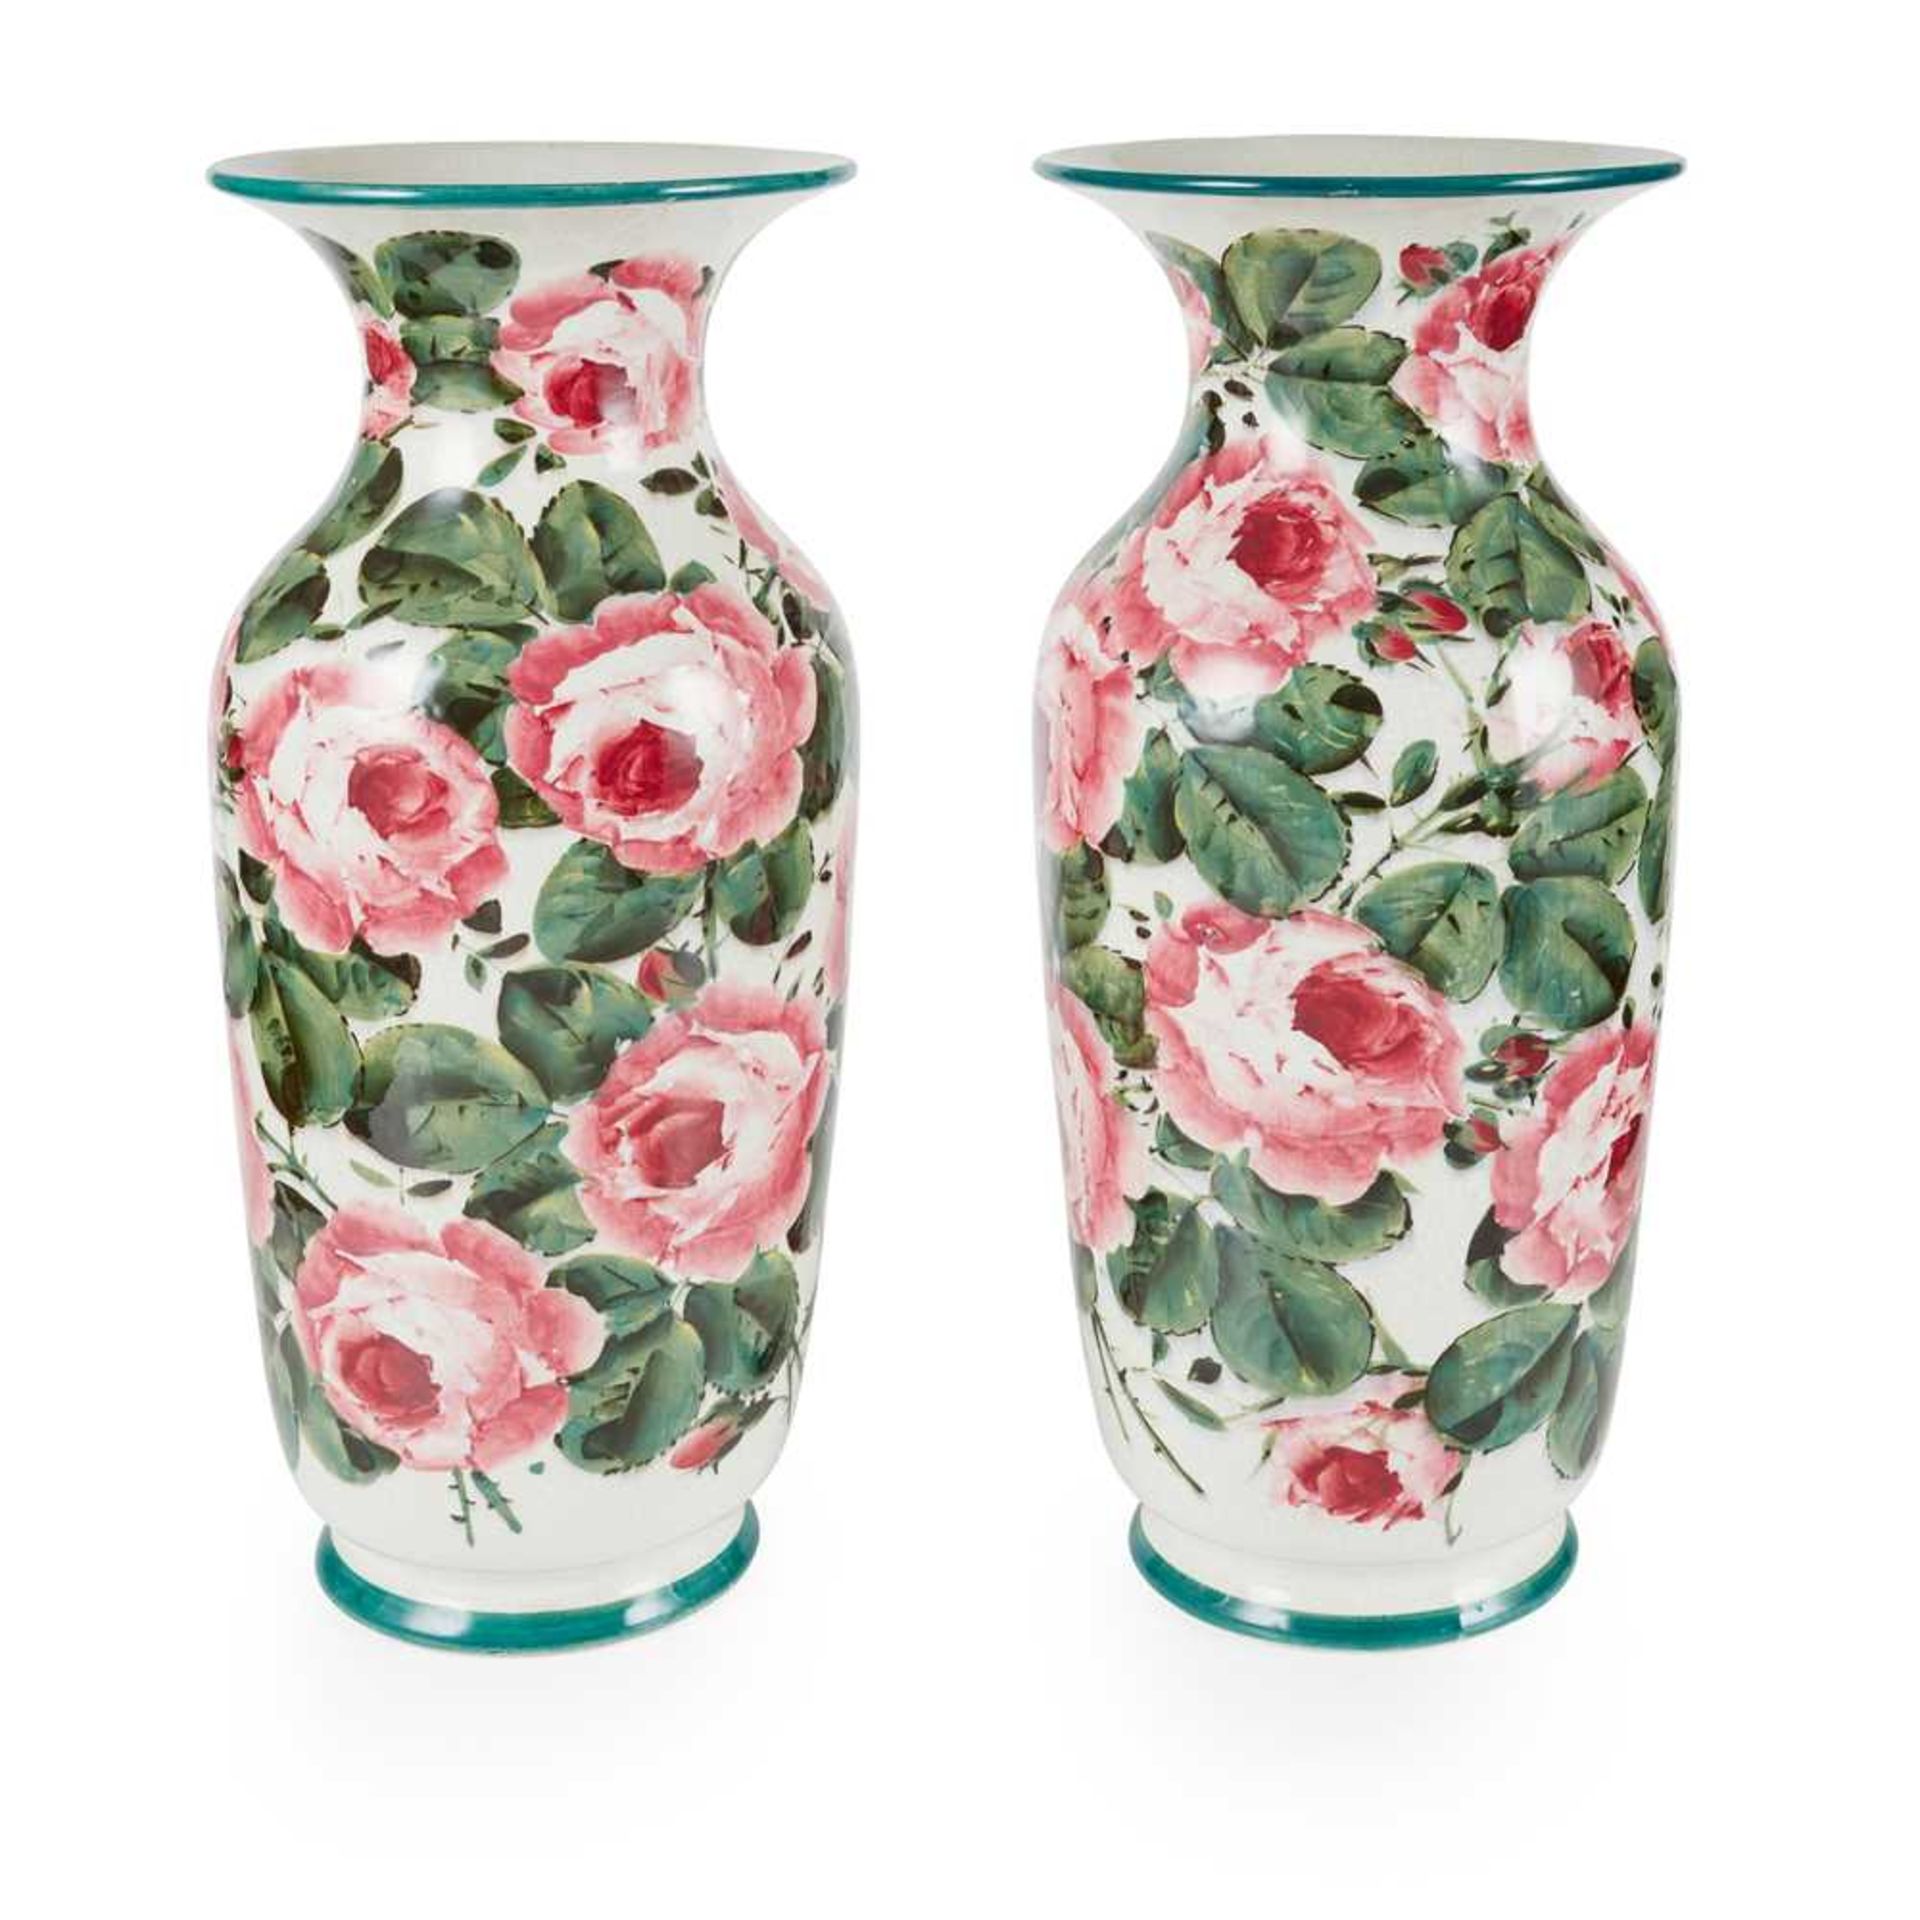 A PAIR OF WEMYSS WARE ELGIN VASES 'CABBAGE ROSES' PATTERN, CIRCA 1900